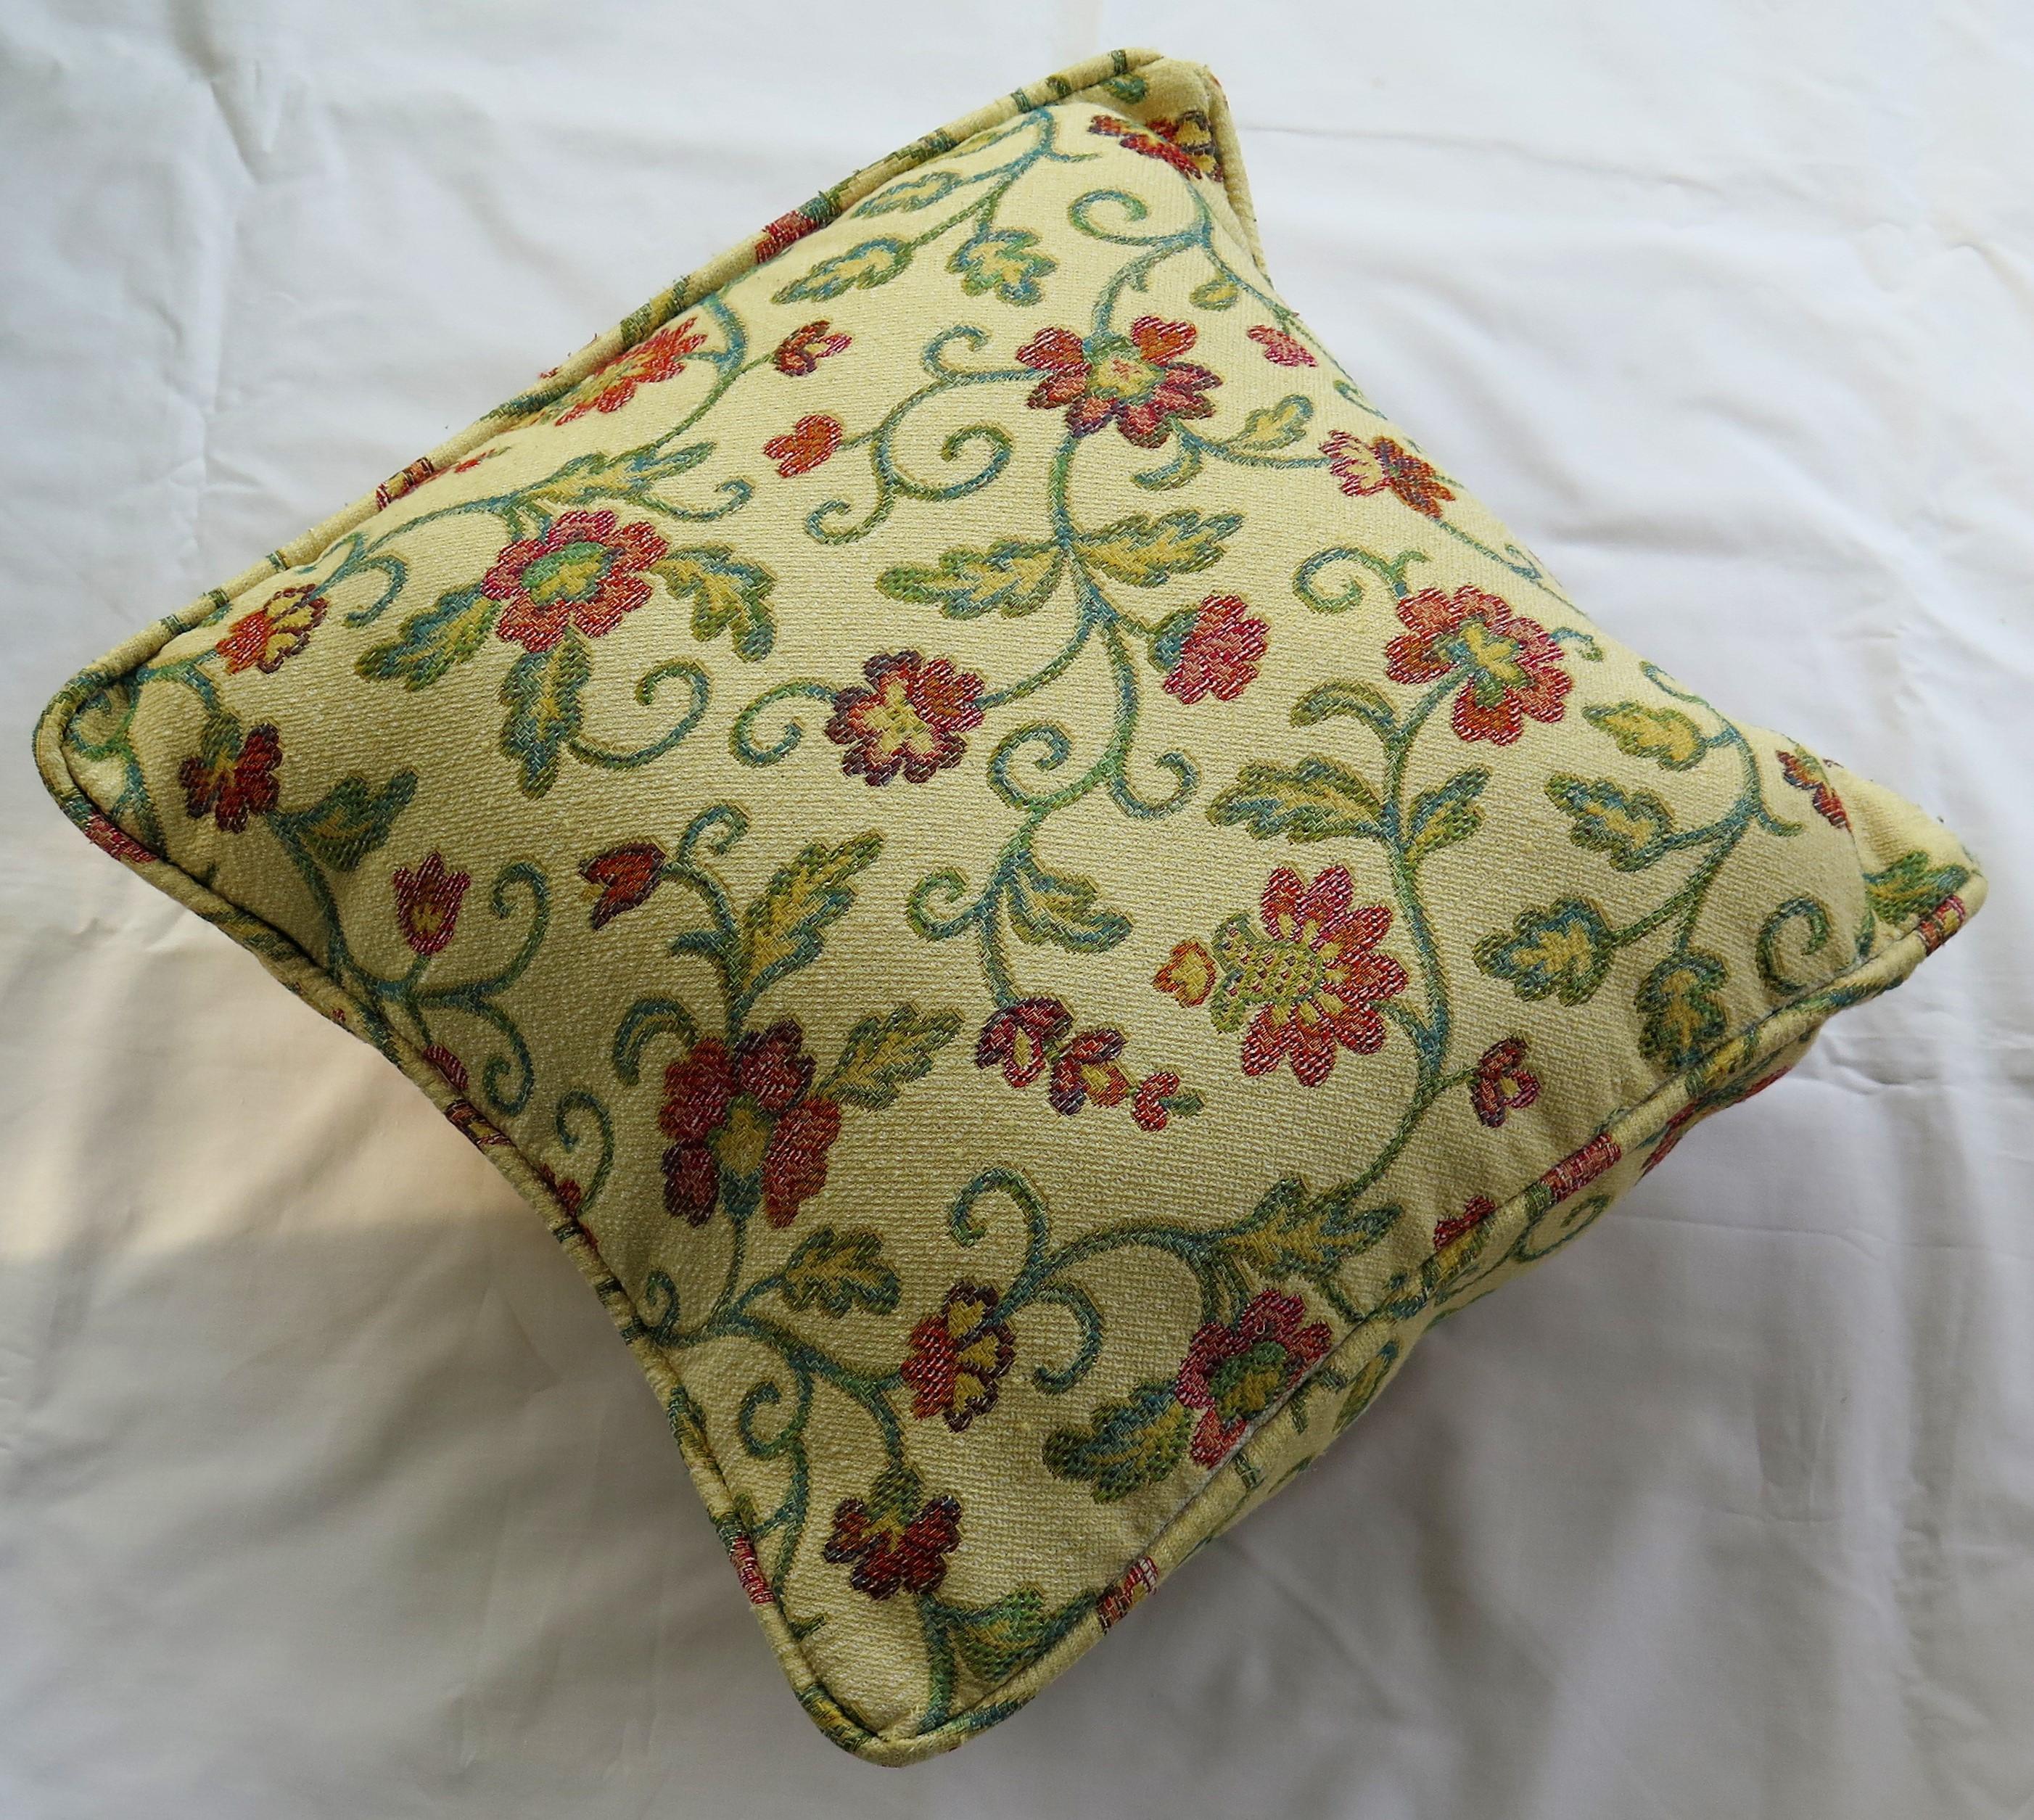 Woven Cushion or Pillow in Art Nouveau Floral Vine Style, 20th Century For Sale 1